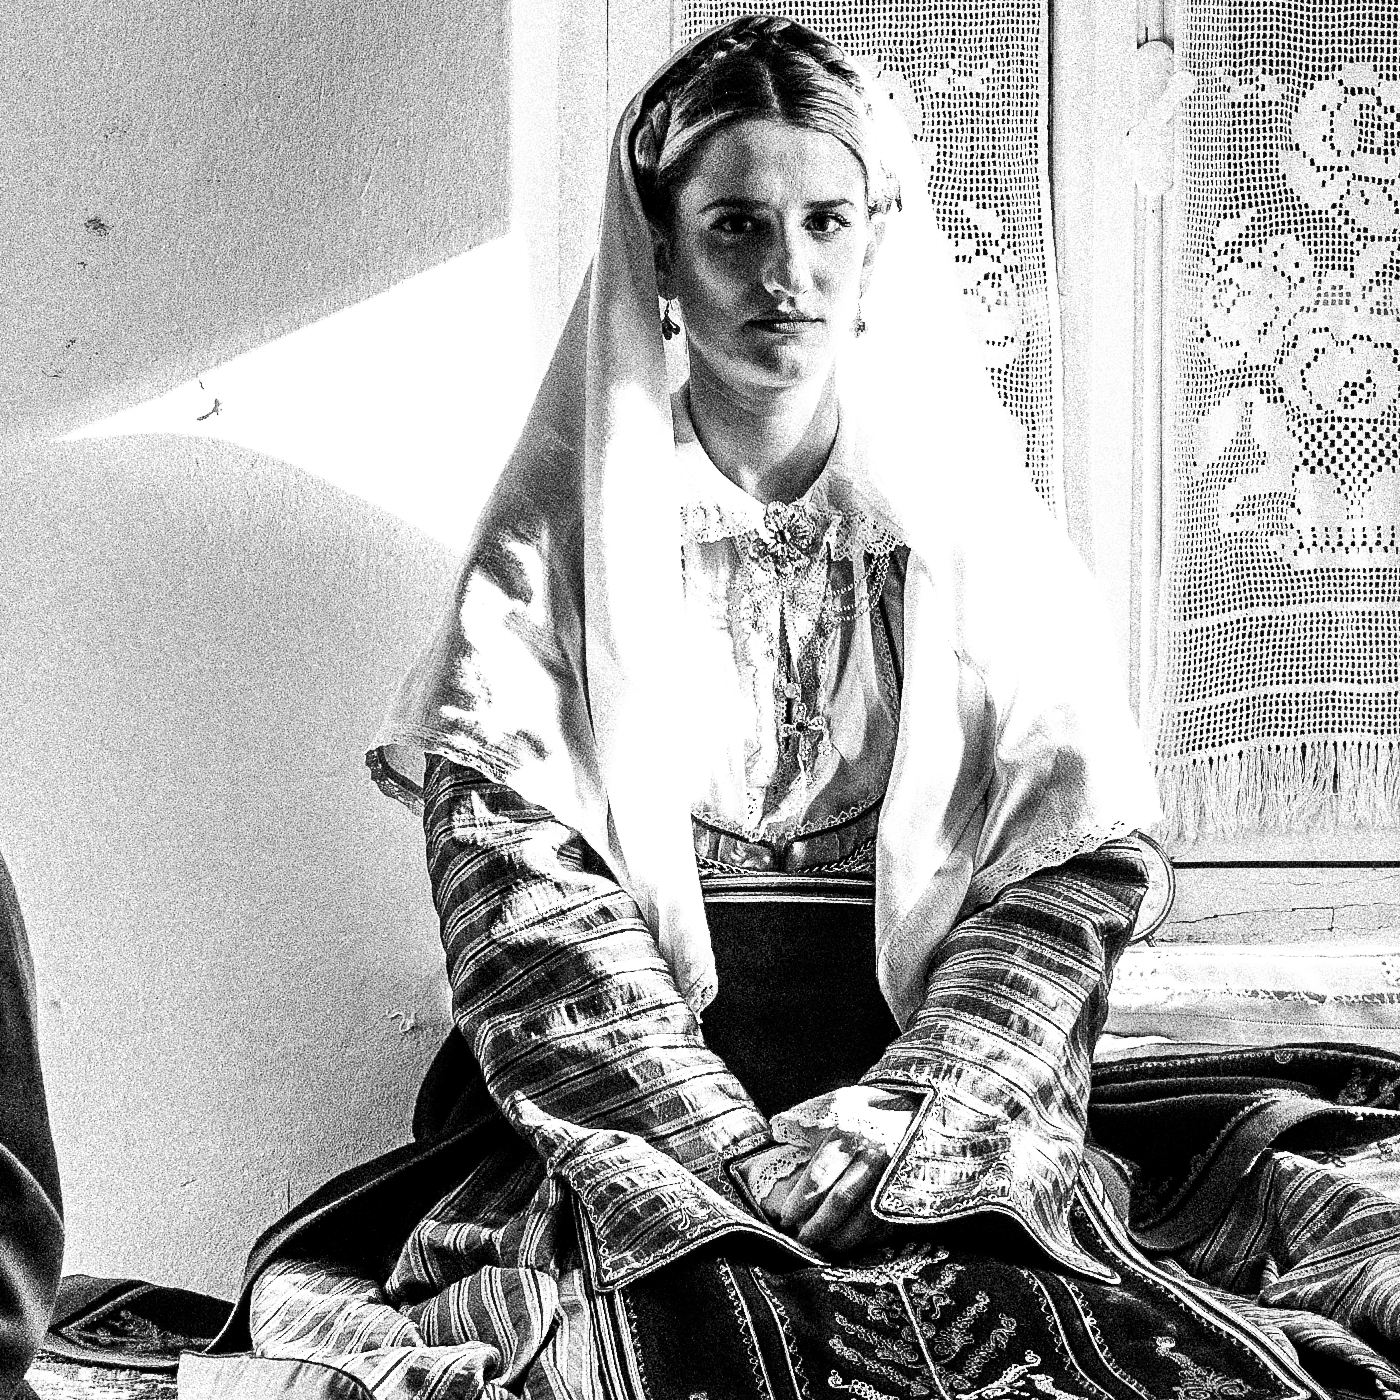 Black and White Photography Wall Art Greece | Costumes of Platanos in a traditional local bedroom Nafpaktos Aetoloacarnanea Greece by George Tatakis - detailed view